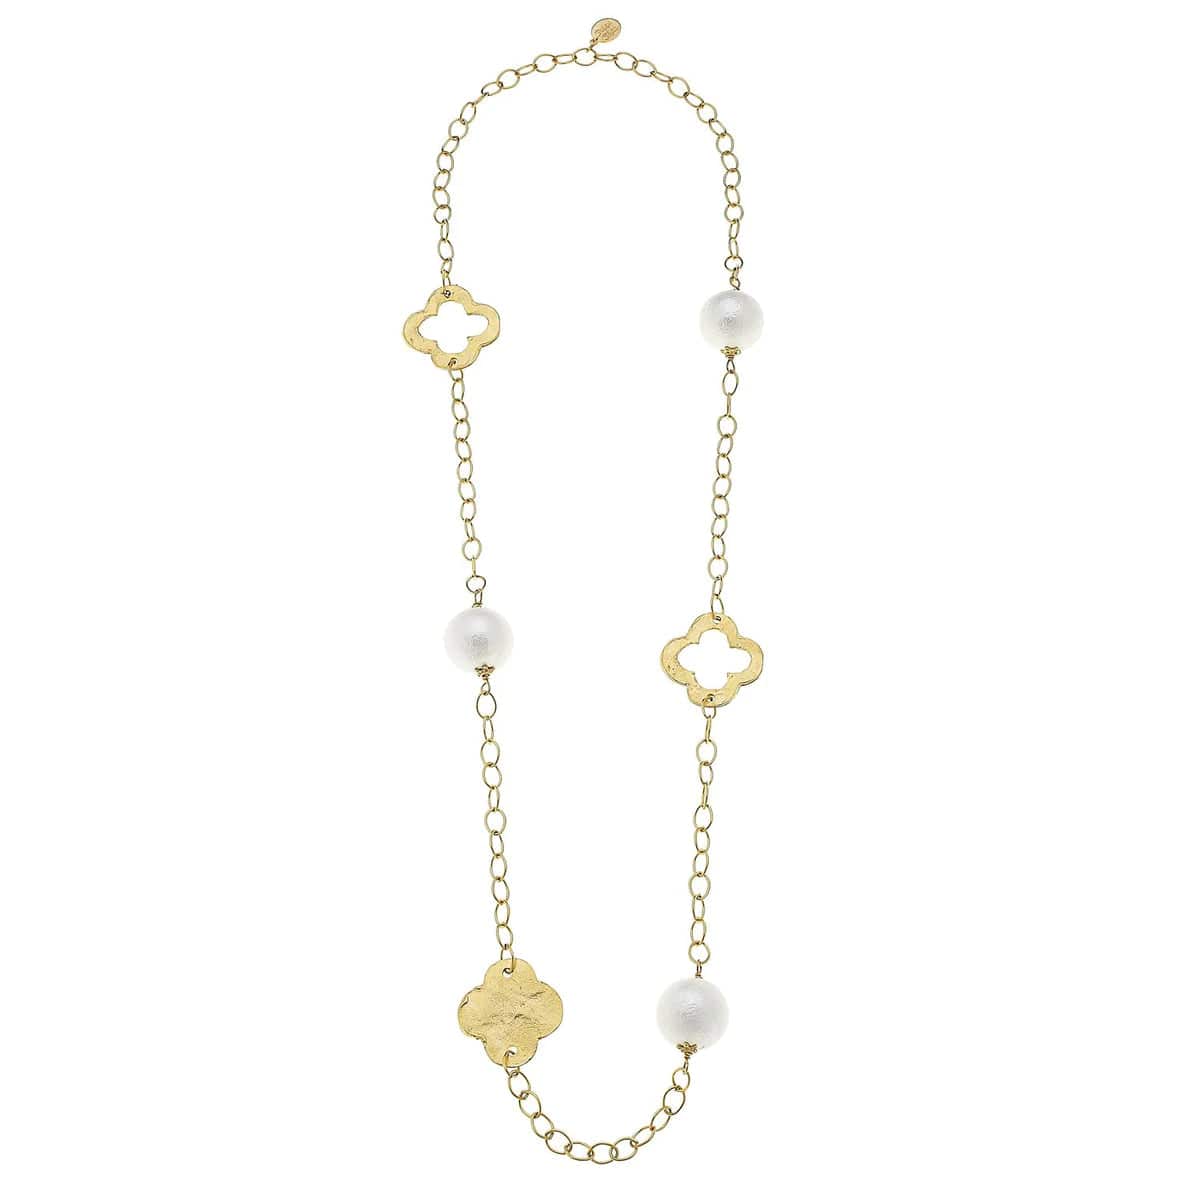 Susan Shaw - Cotton Pearl Clover Chain Necklace - Findlay Rowe Designs